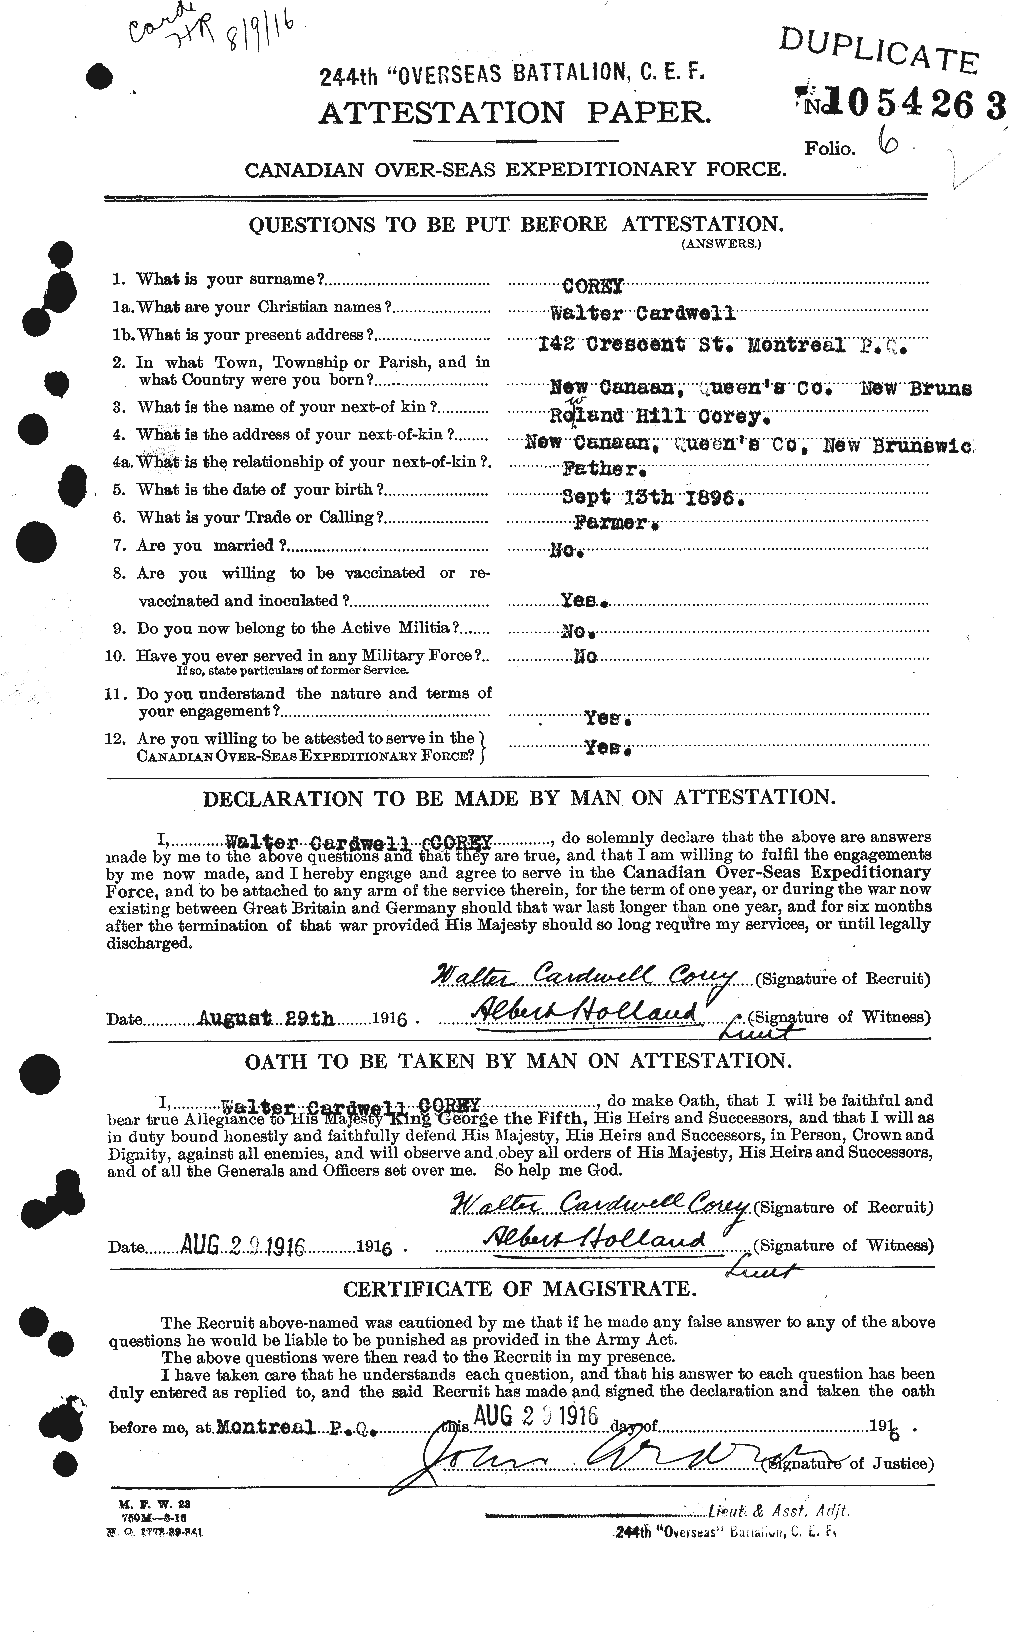 Personnel Records of the First World War - CEF 054394a